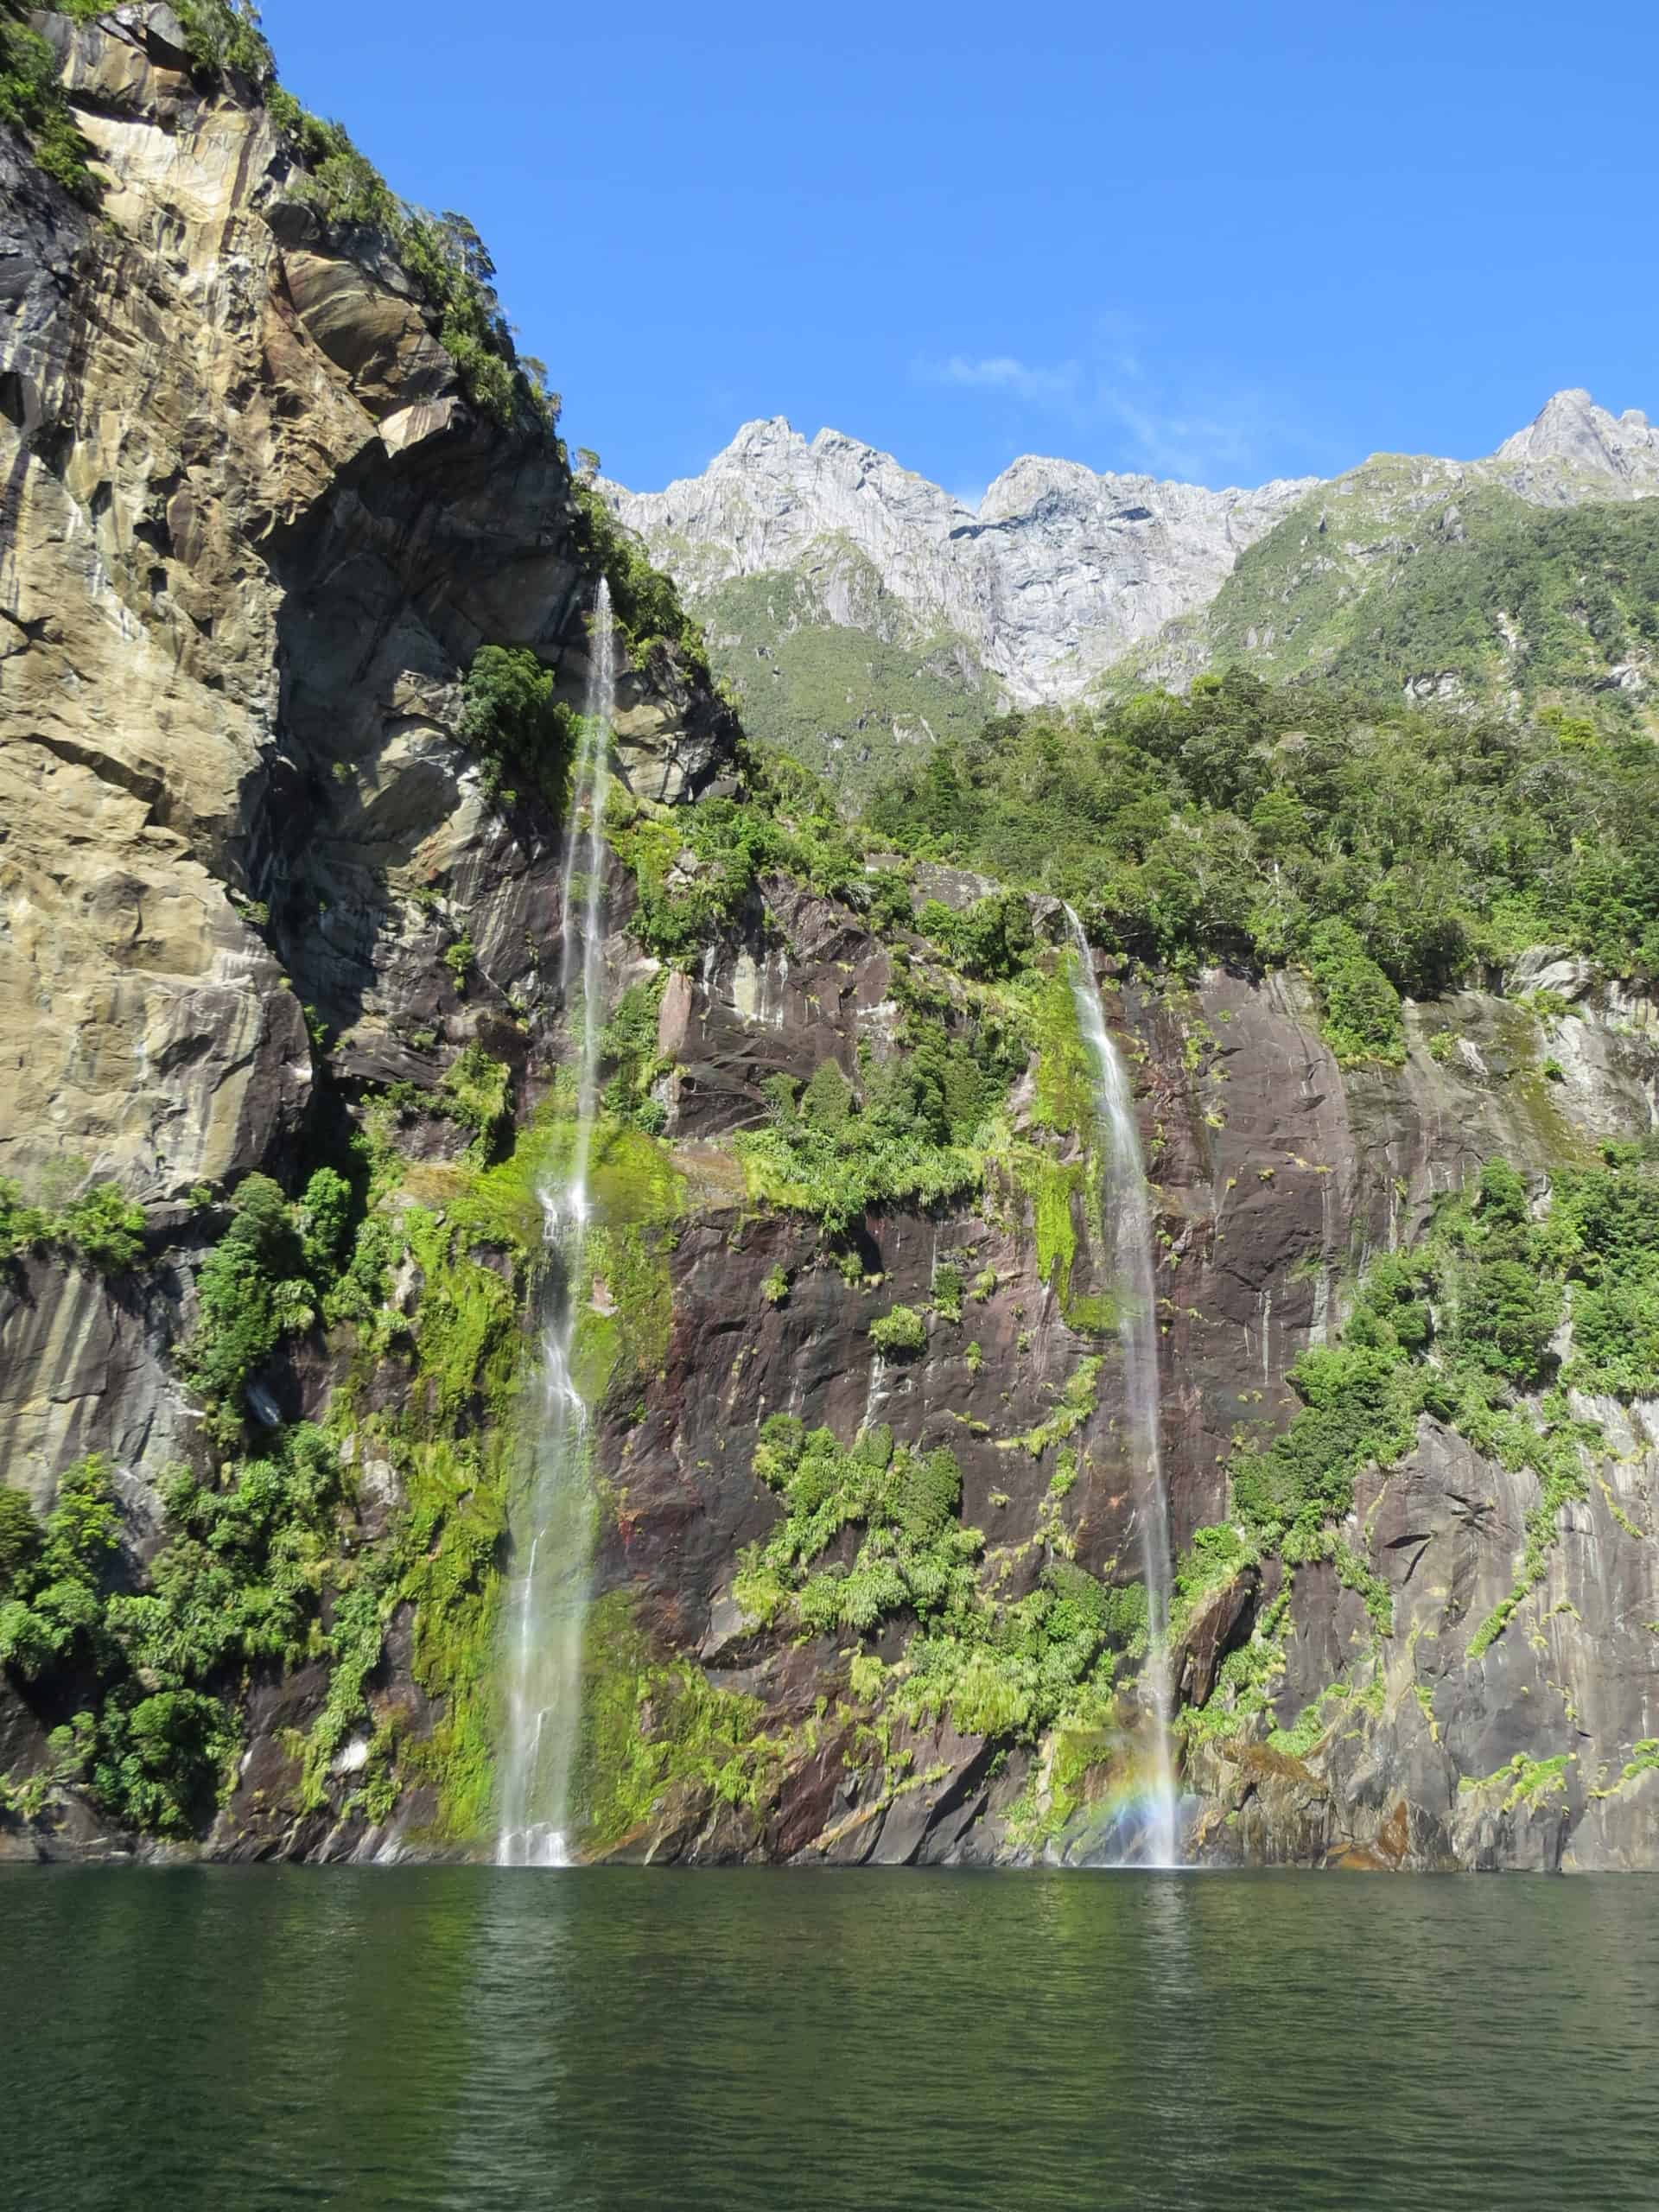 Waterfalls are everywhere in Fiordland after heavy rainfall